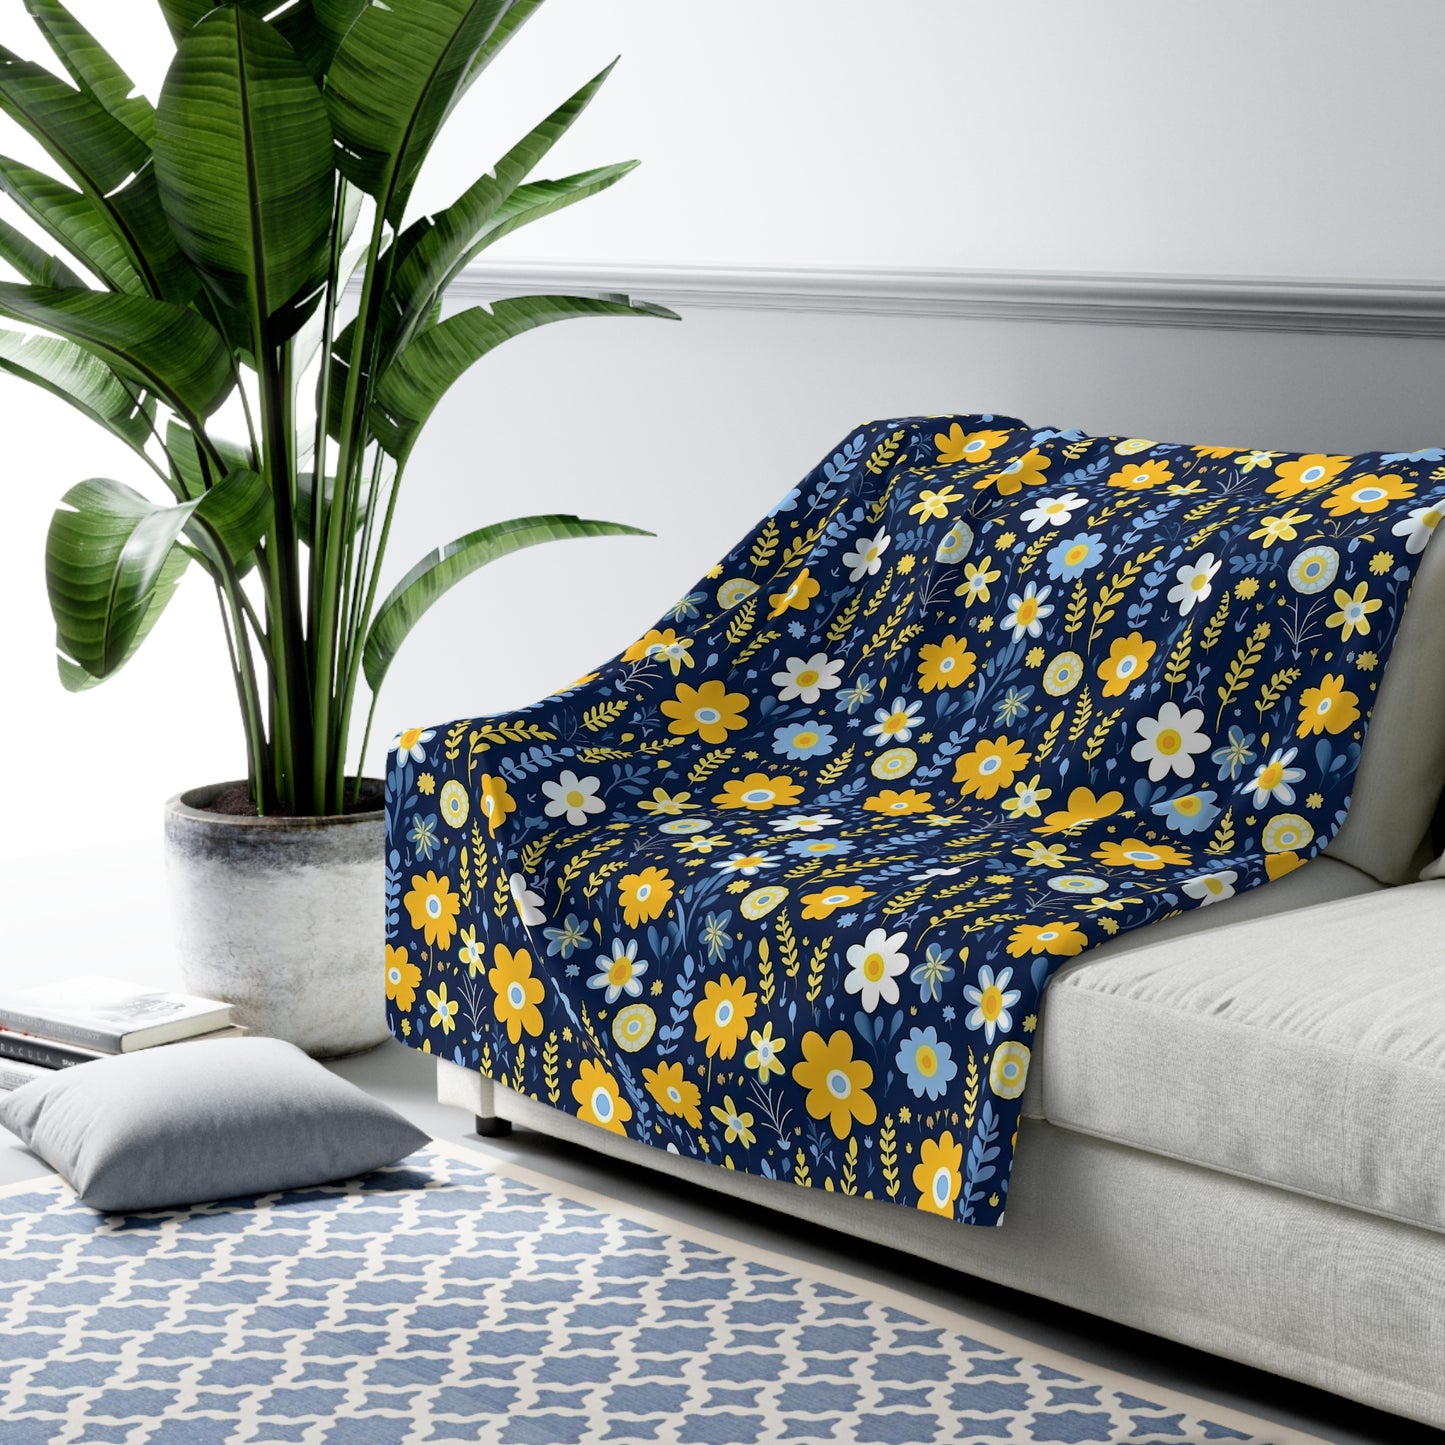 Watercolor Floral Sherpa Blanket - Blue and Yellow Floral Sherpa Blanket